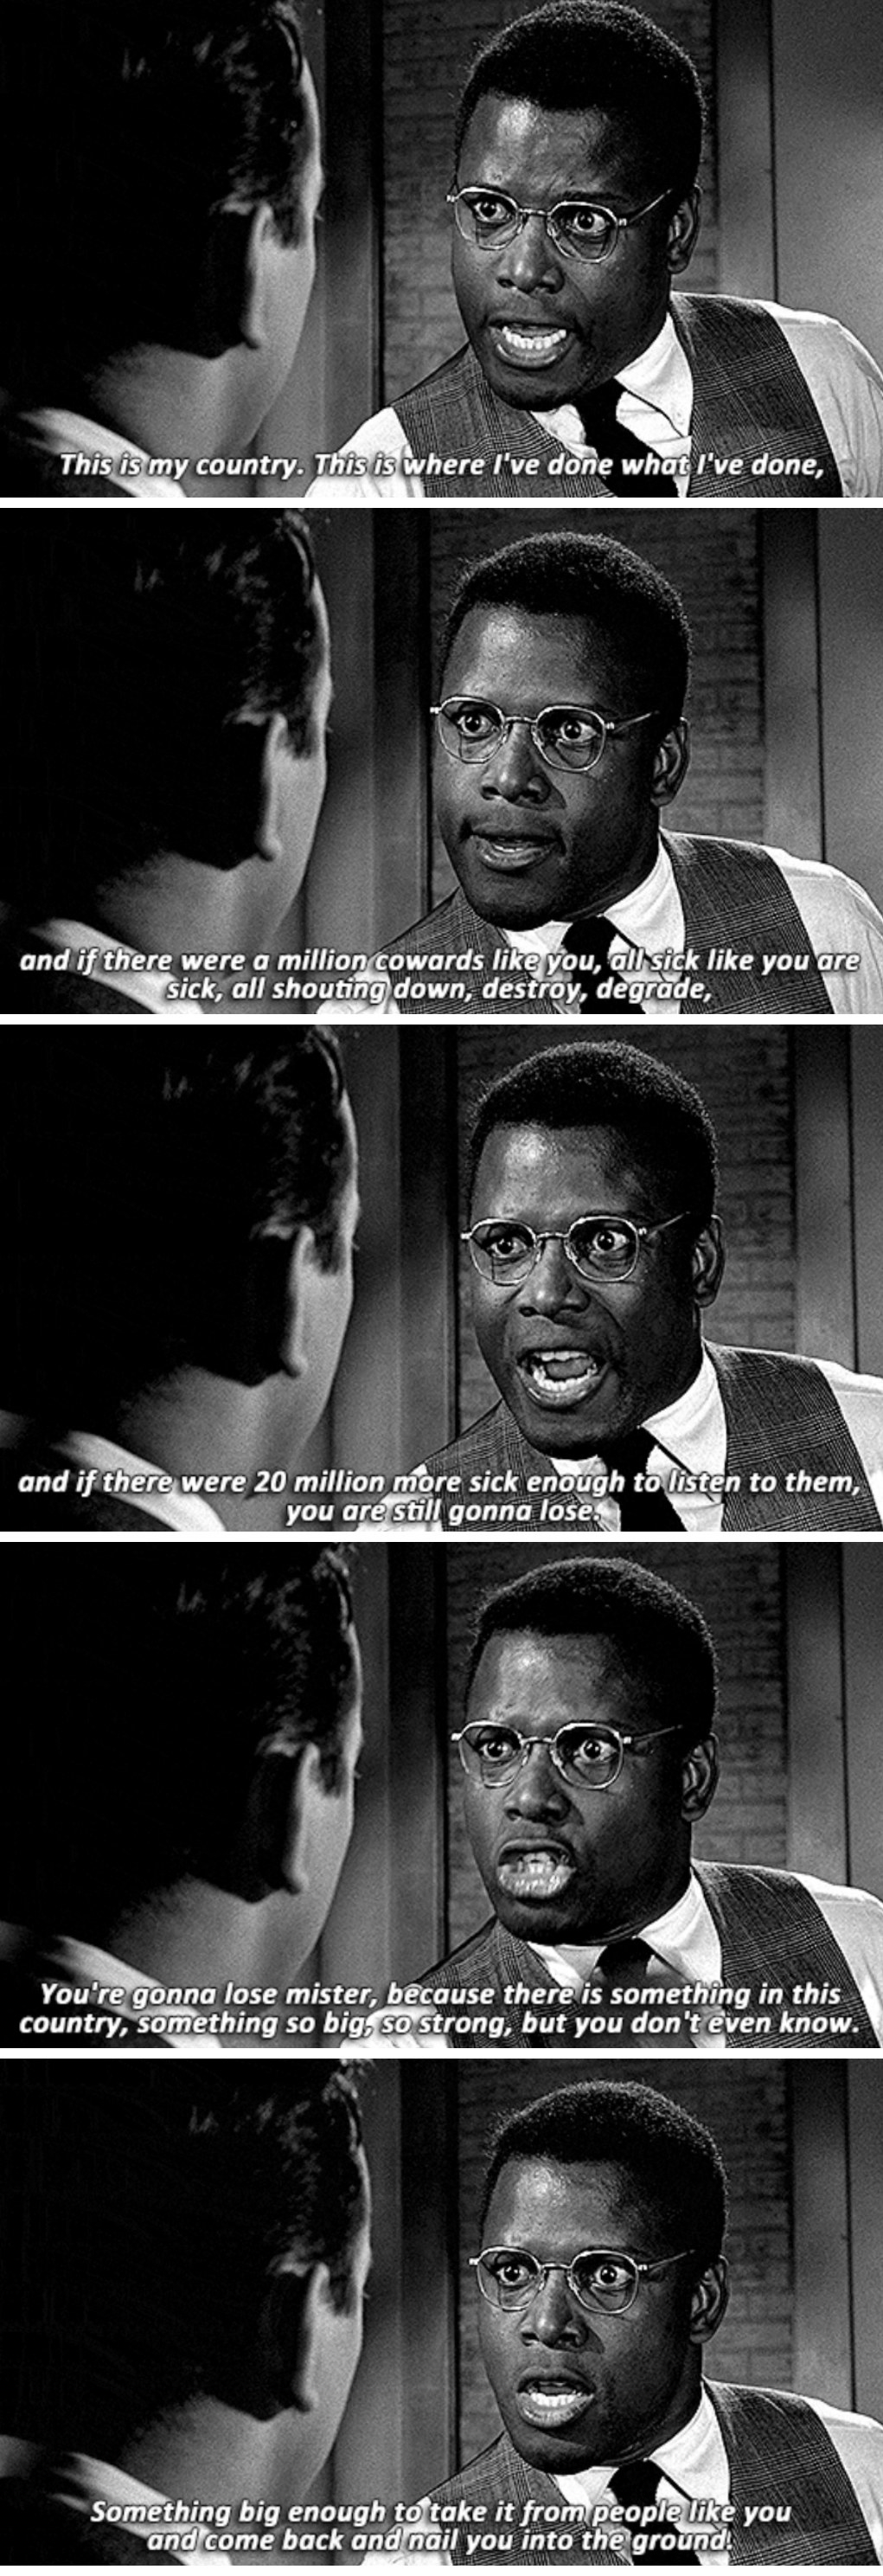 Sidney Poitier in &quot;Pressure Point,&quot; telling Bobby Darin&#x27;s racist, anti-Semitic character: &quot;You&#x27;re gonna lose mister, because there is something in this country, something so big, so strong, but you don&#x27;t even know&quot;